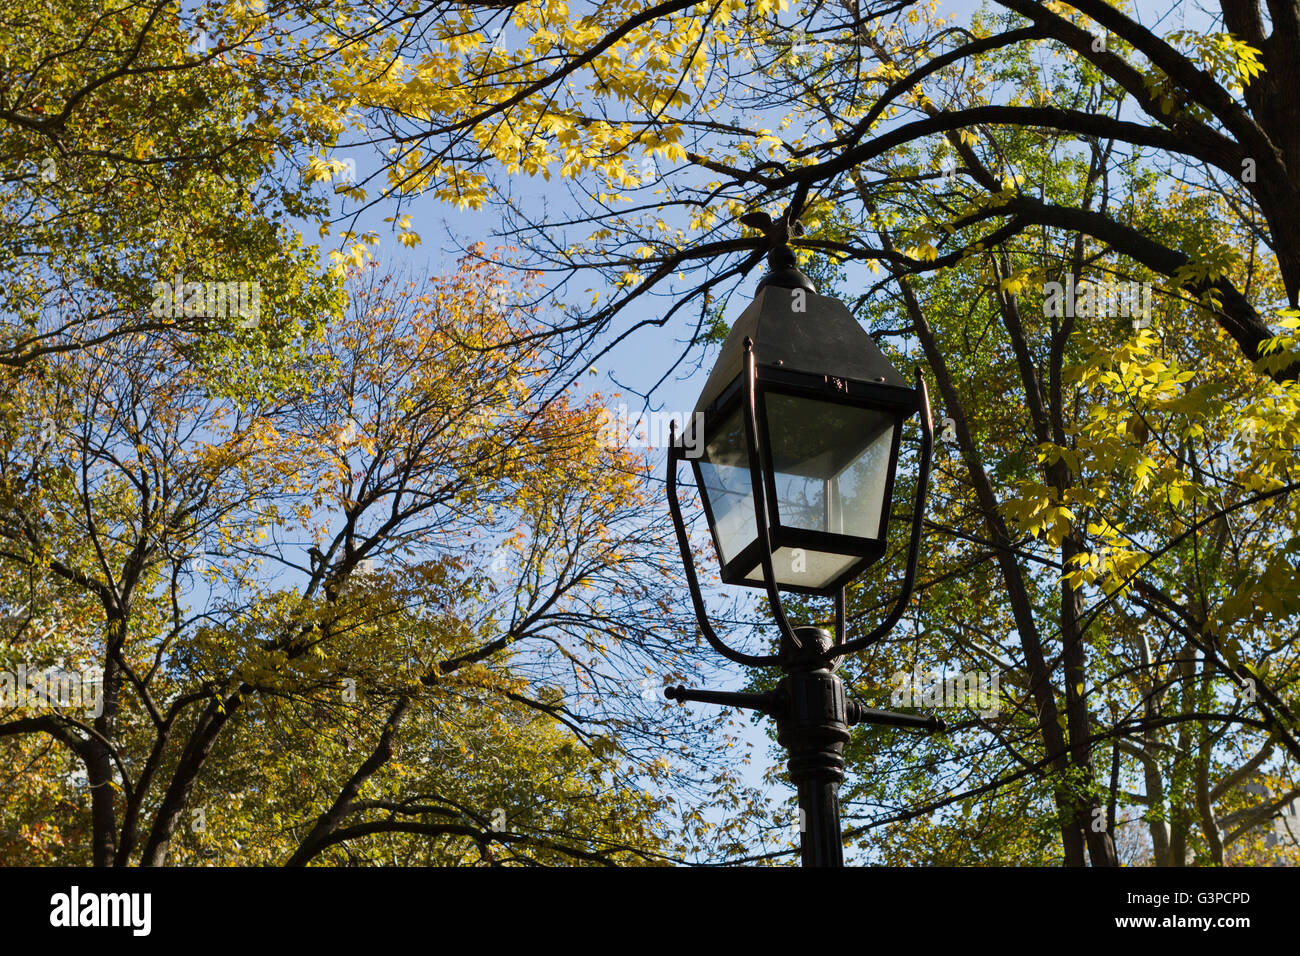 Lamp post in NYC park with fall foliage trees in background Stock Photo